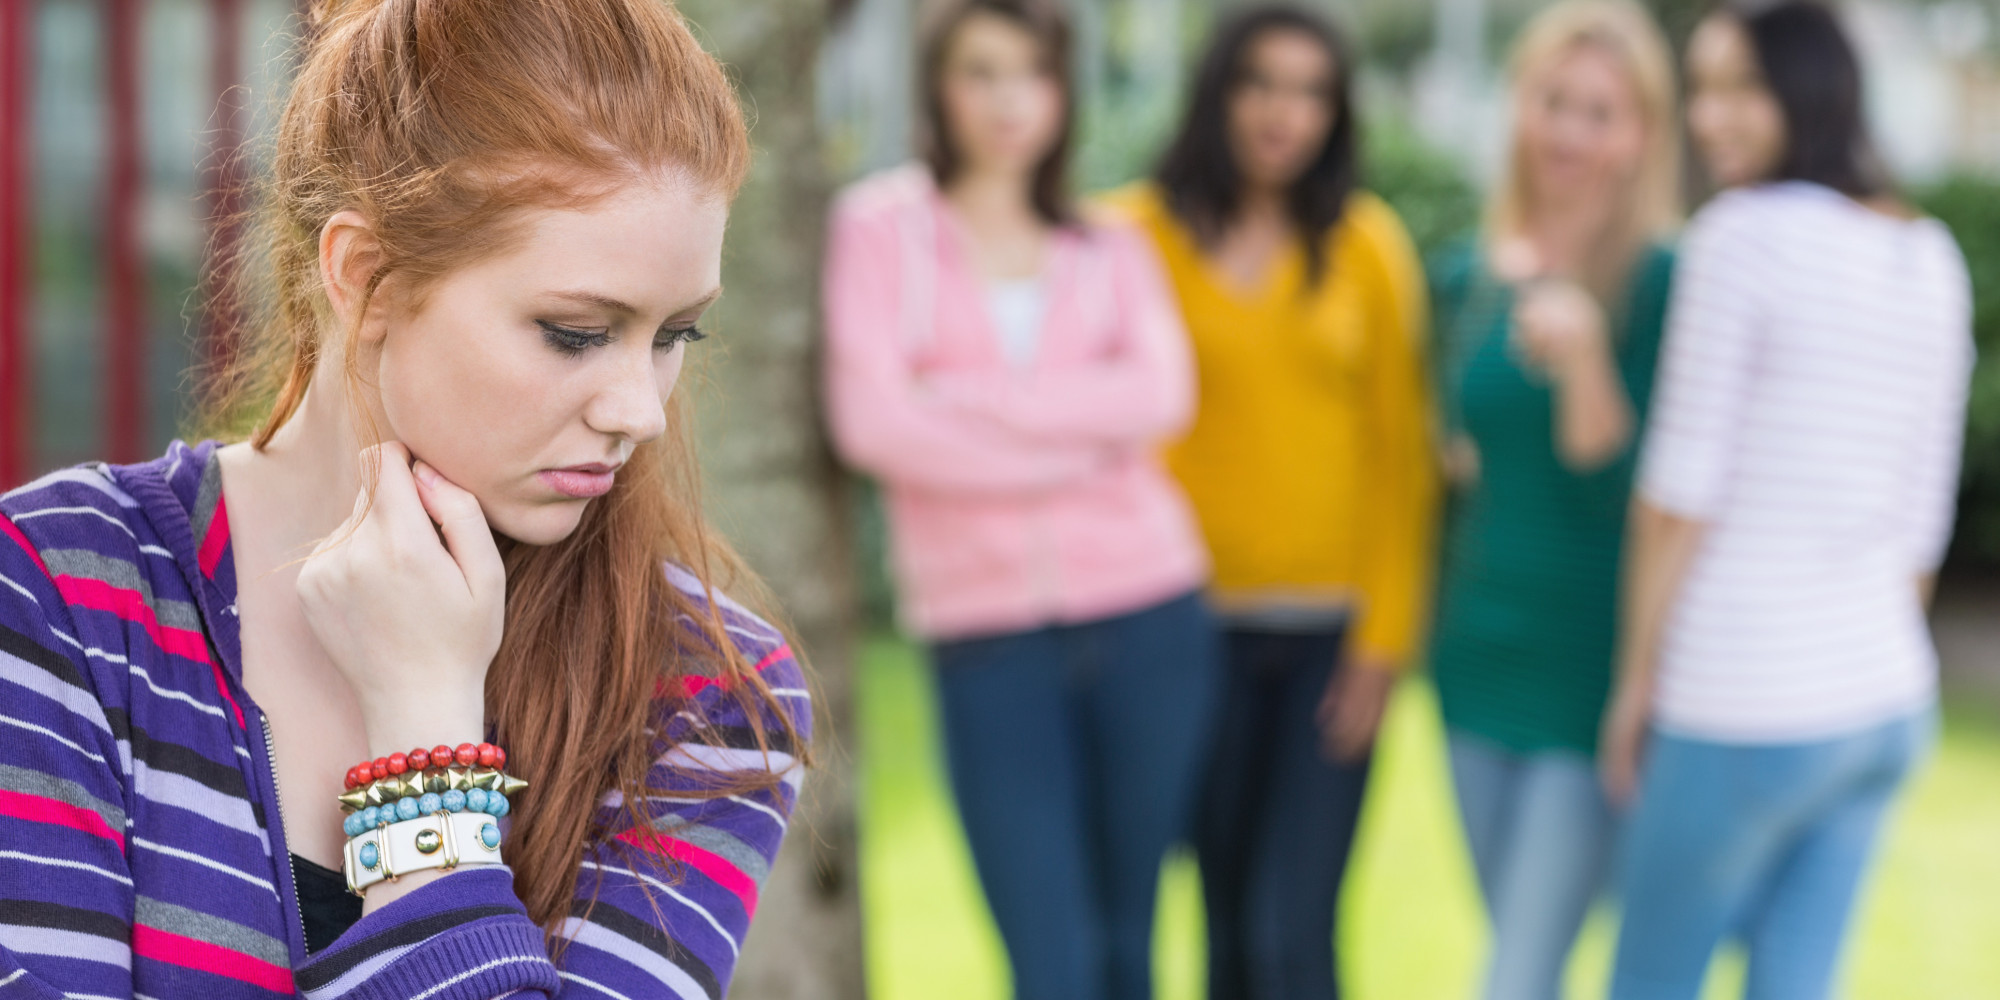 The Long-term Effects of Bullying